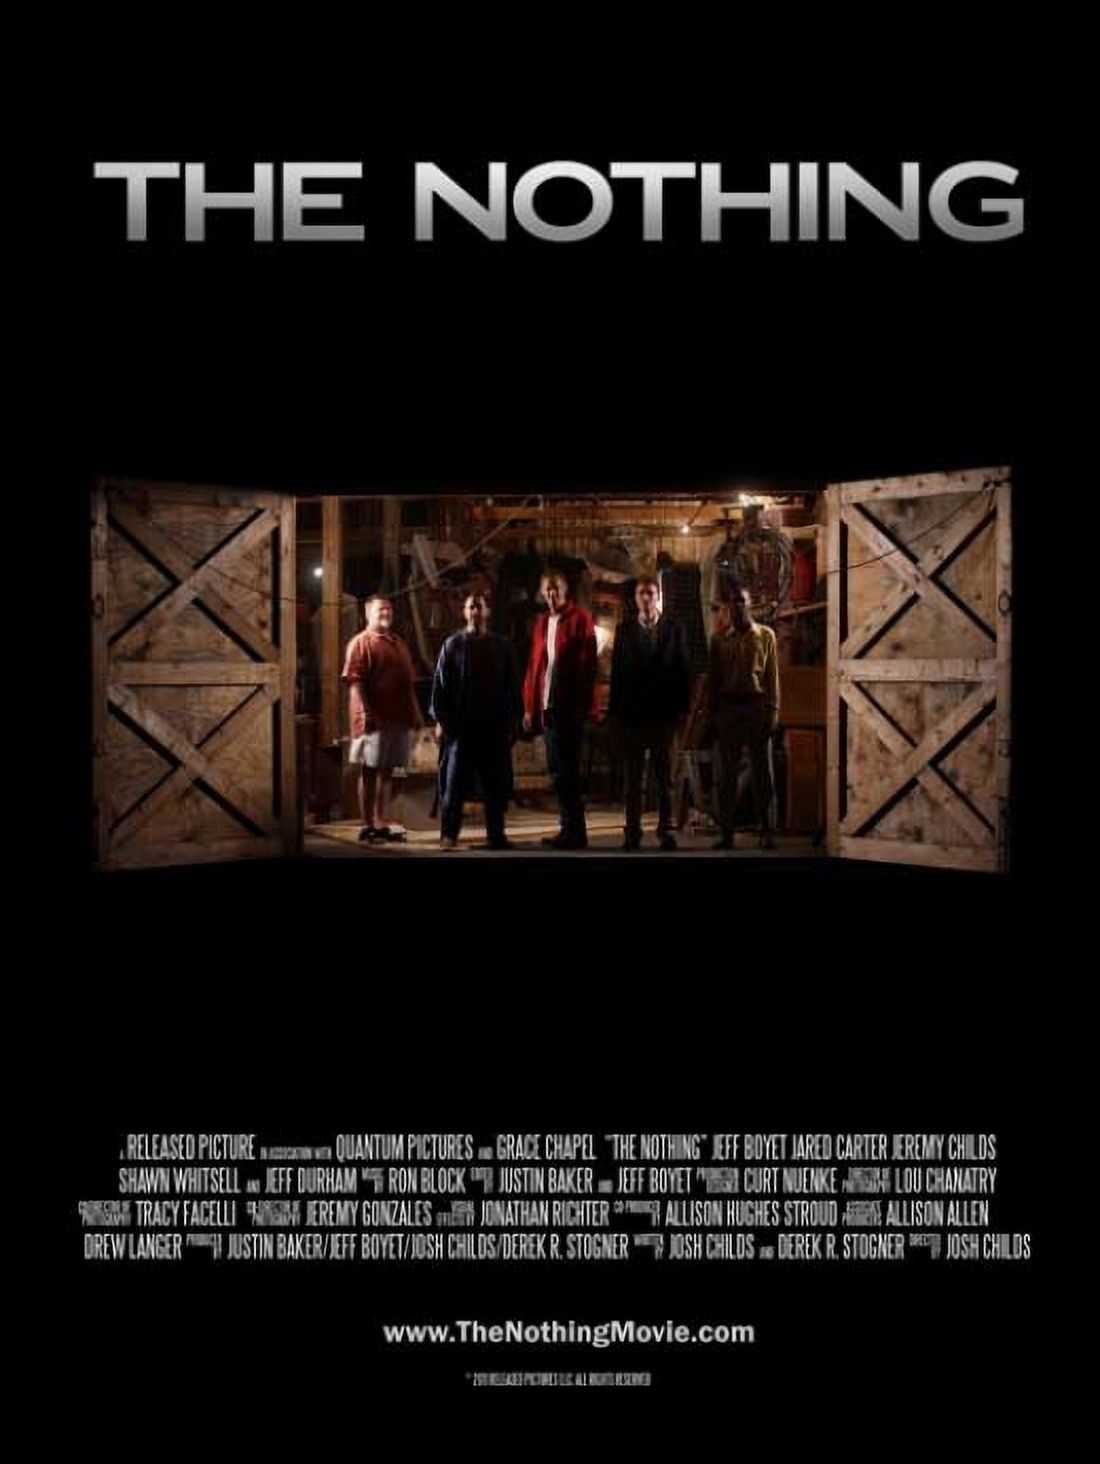 The Nothing Movie Poster (11 x 17) - image 1 of 1